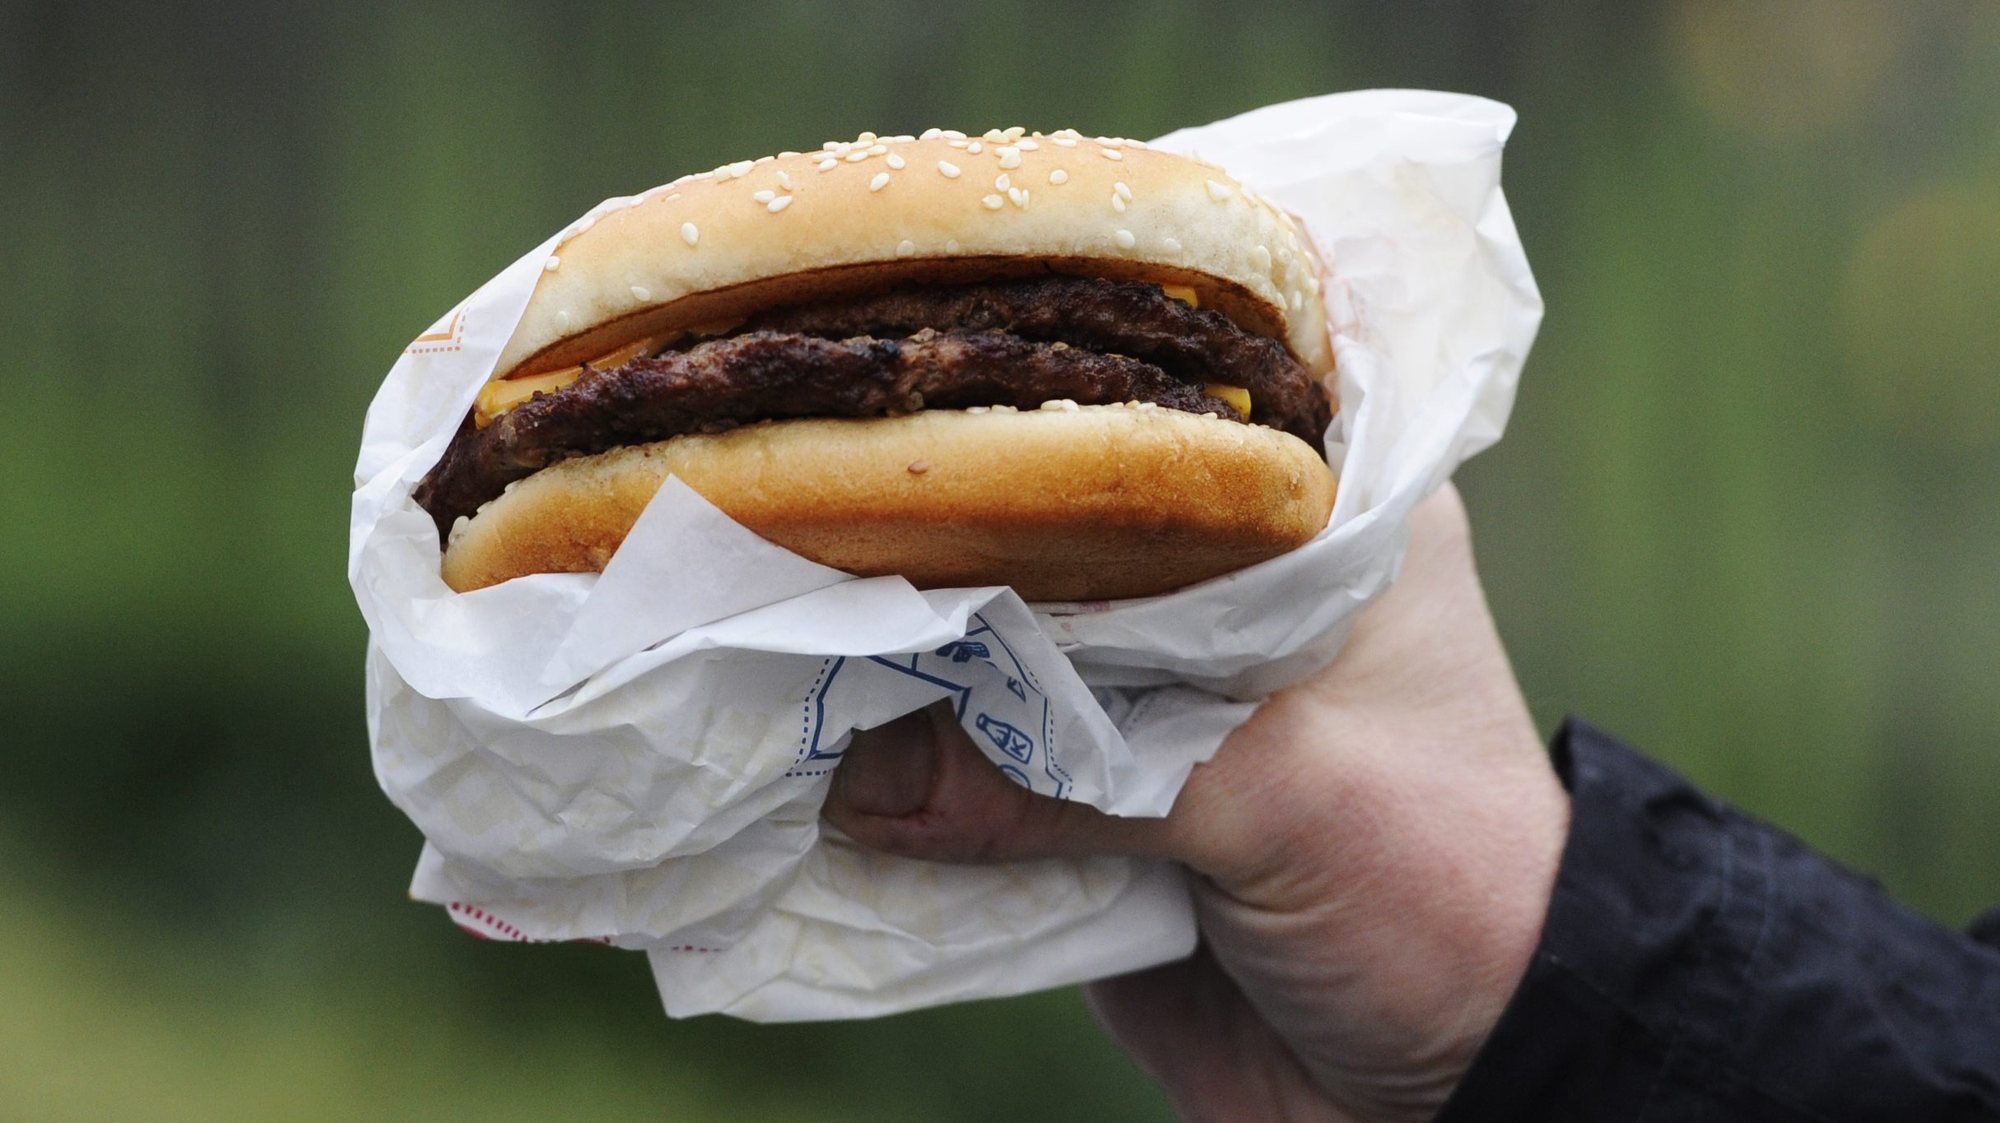 epa03564071 A classic beef burger from the fast food chain Burger King is pictured in London, Britain, 01 February 2013. Burger King has apologized to its customers after discovering horse DNA in beefburgers from its supplier in Ireland.  EPA/FACUNDO ARRIZABALAGA